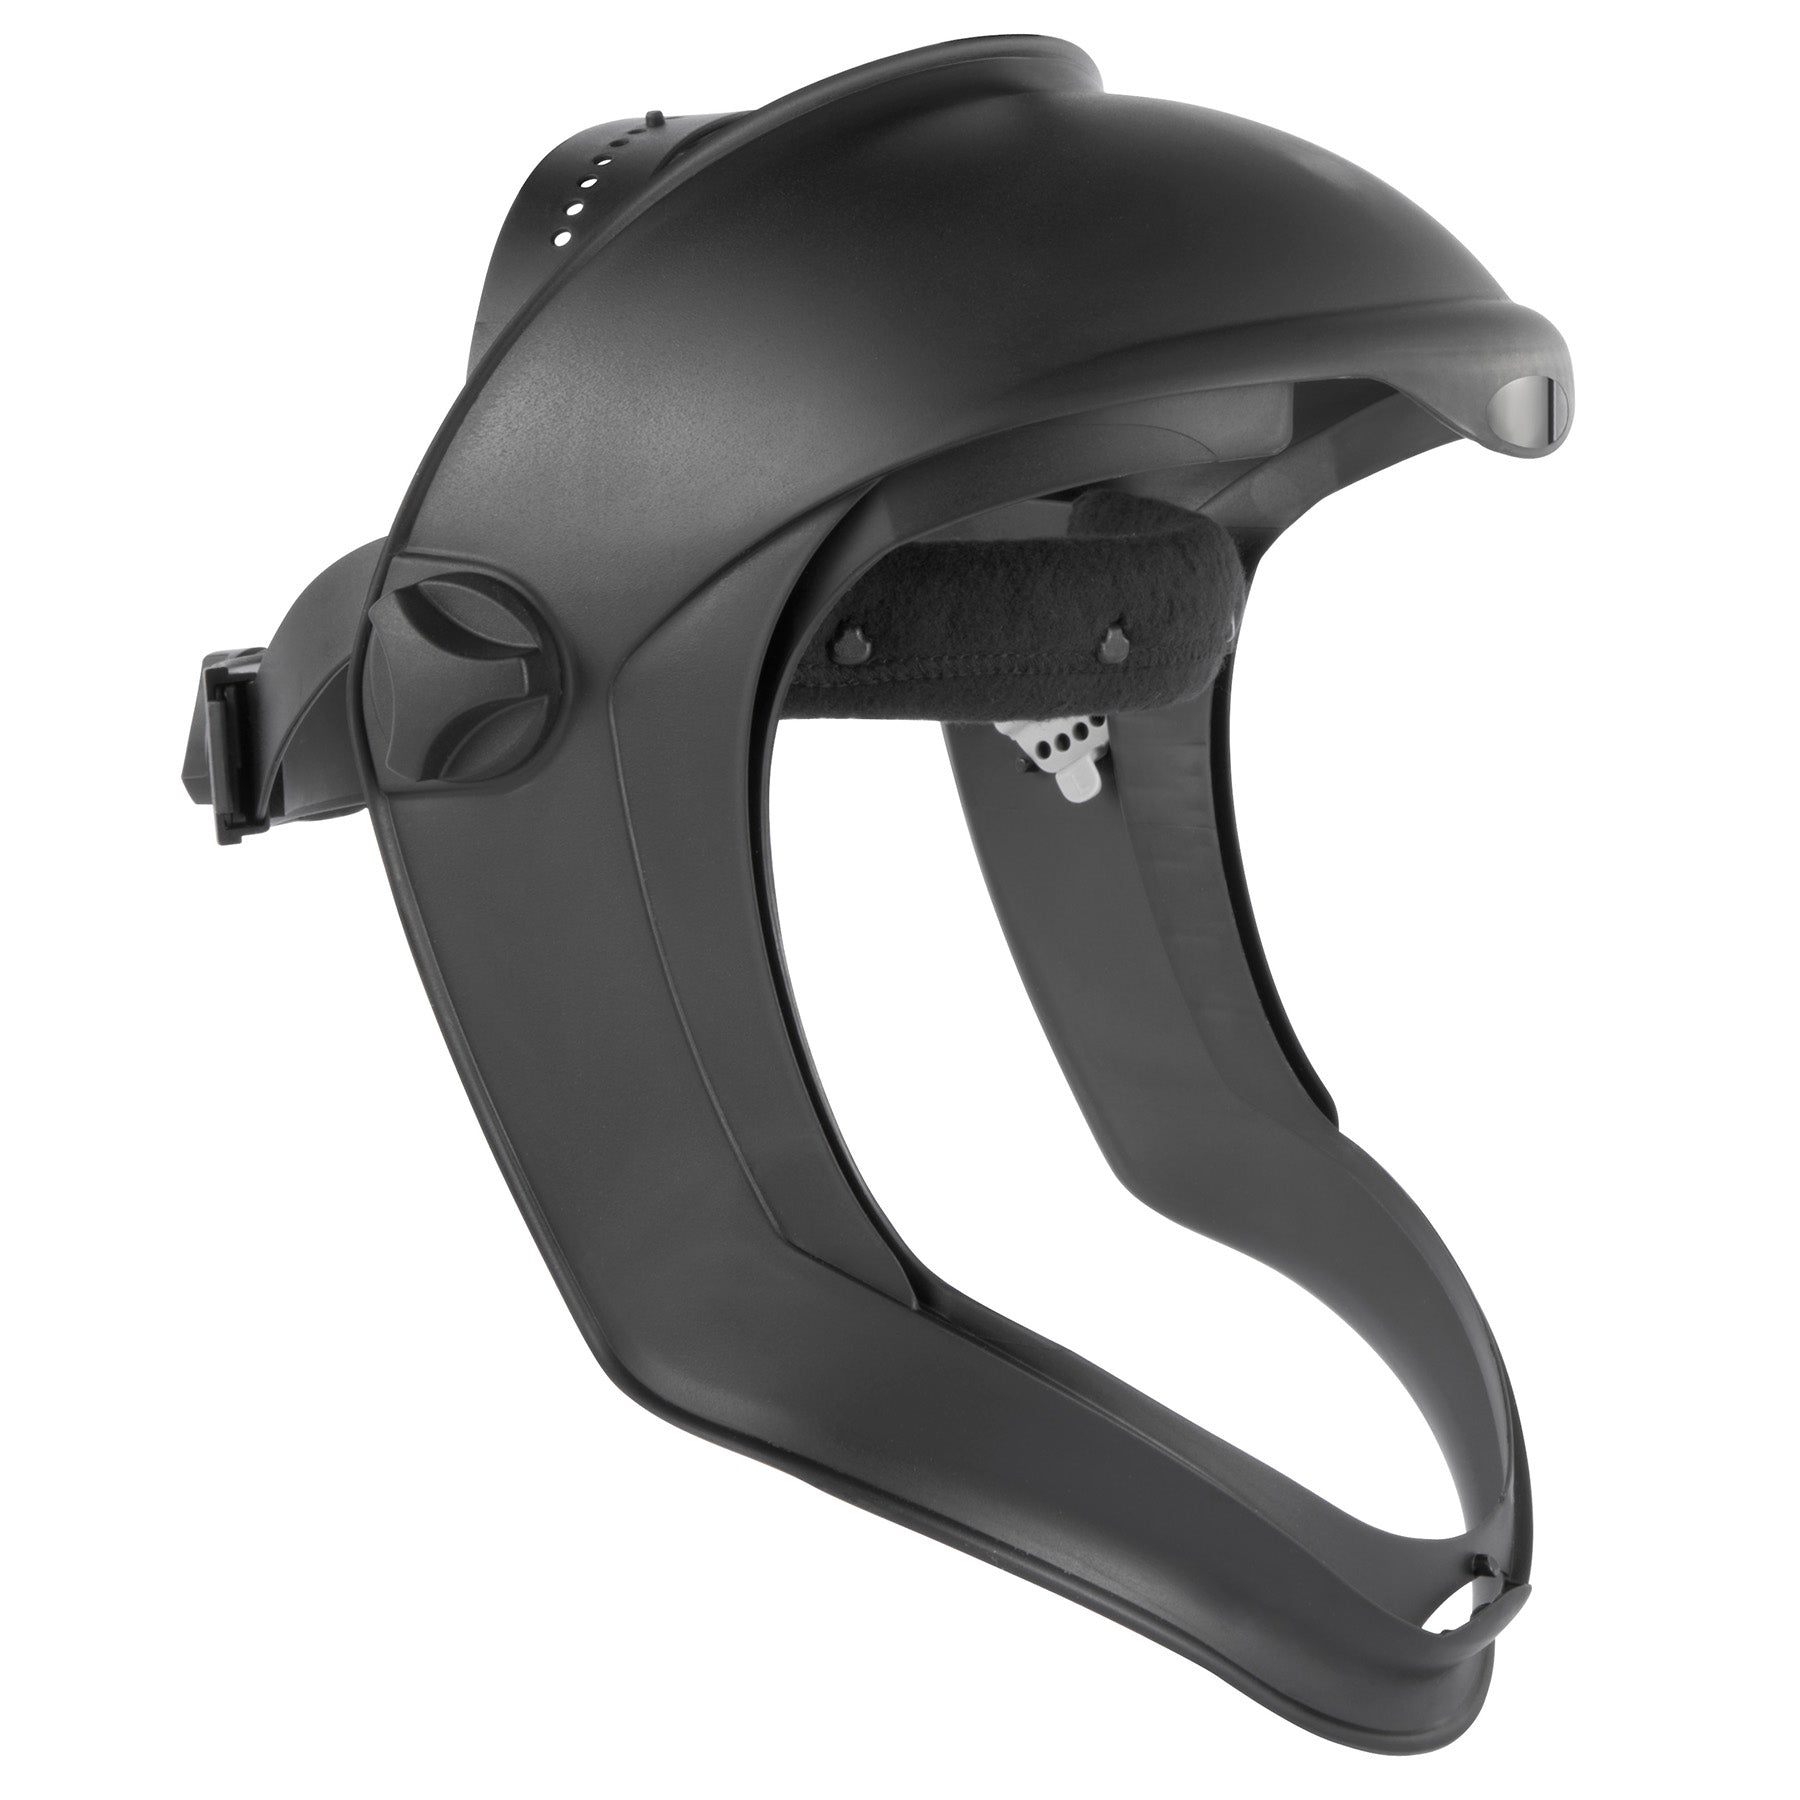 Honeywell 1015113 Bionic Shell Without Suspension (No Visor)